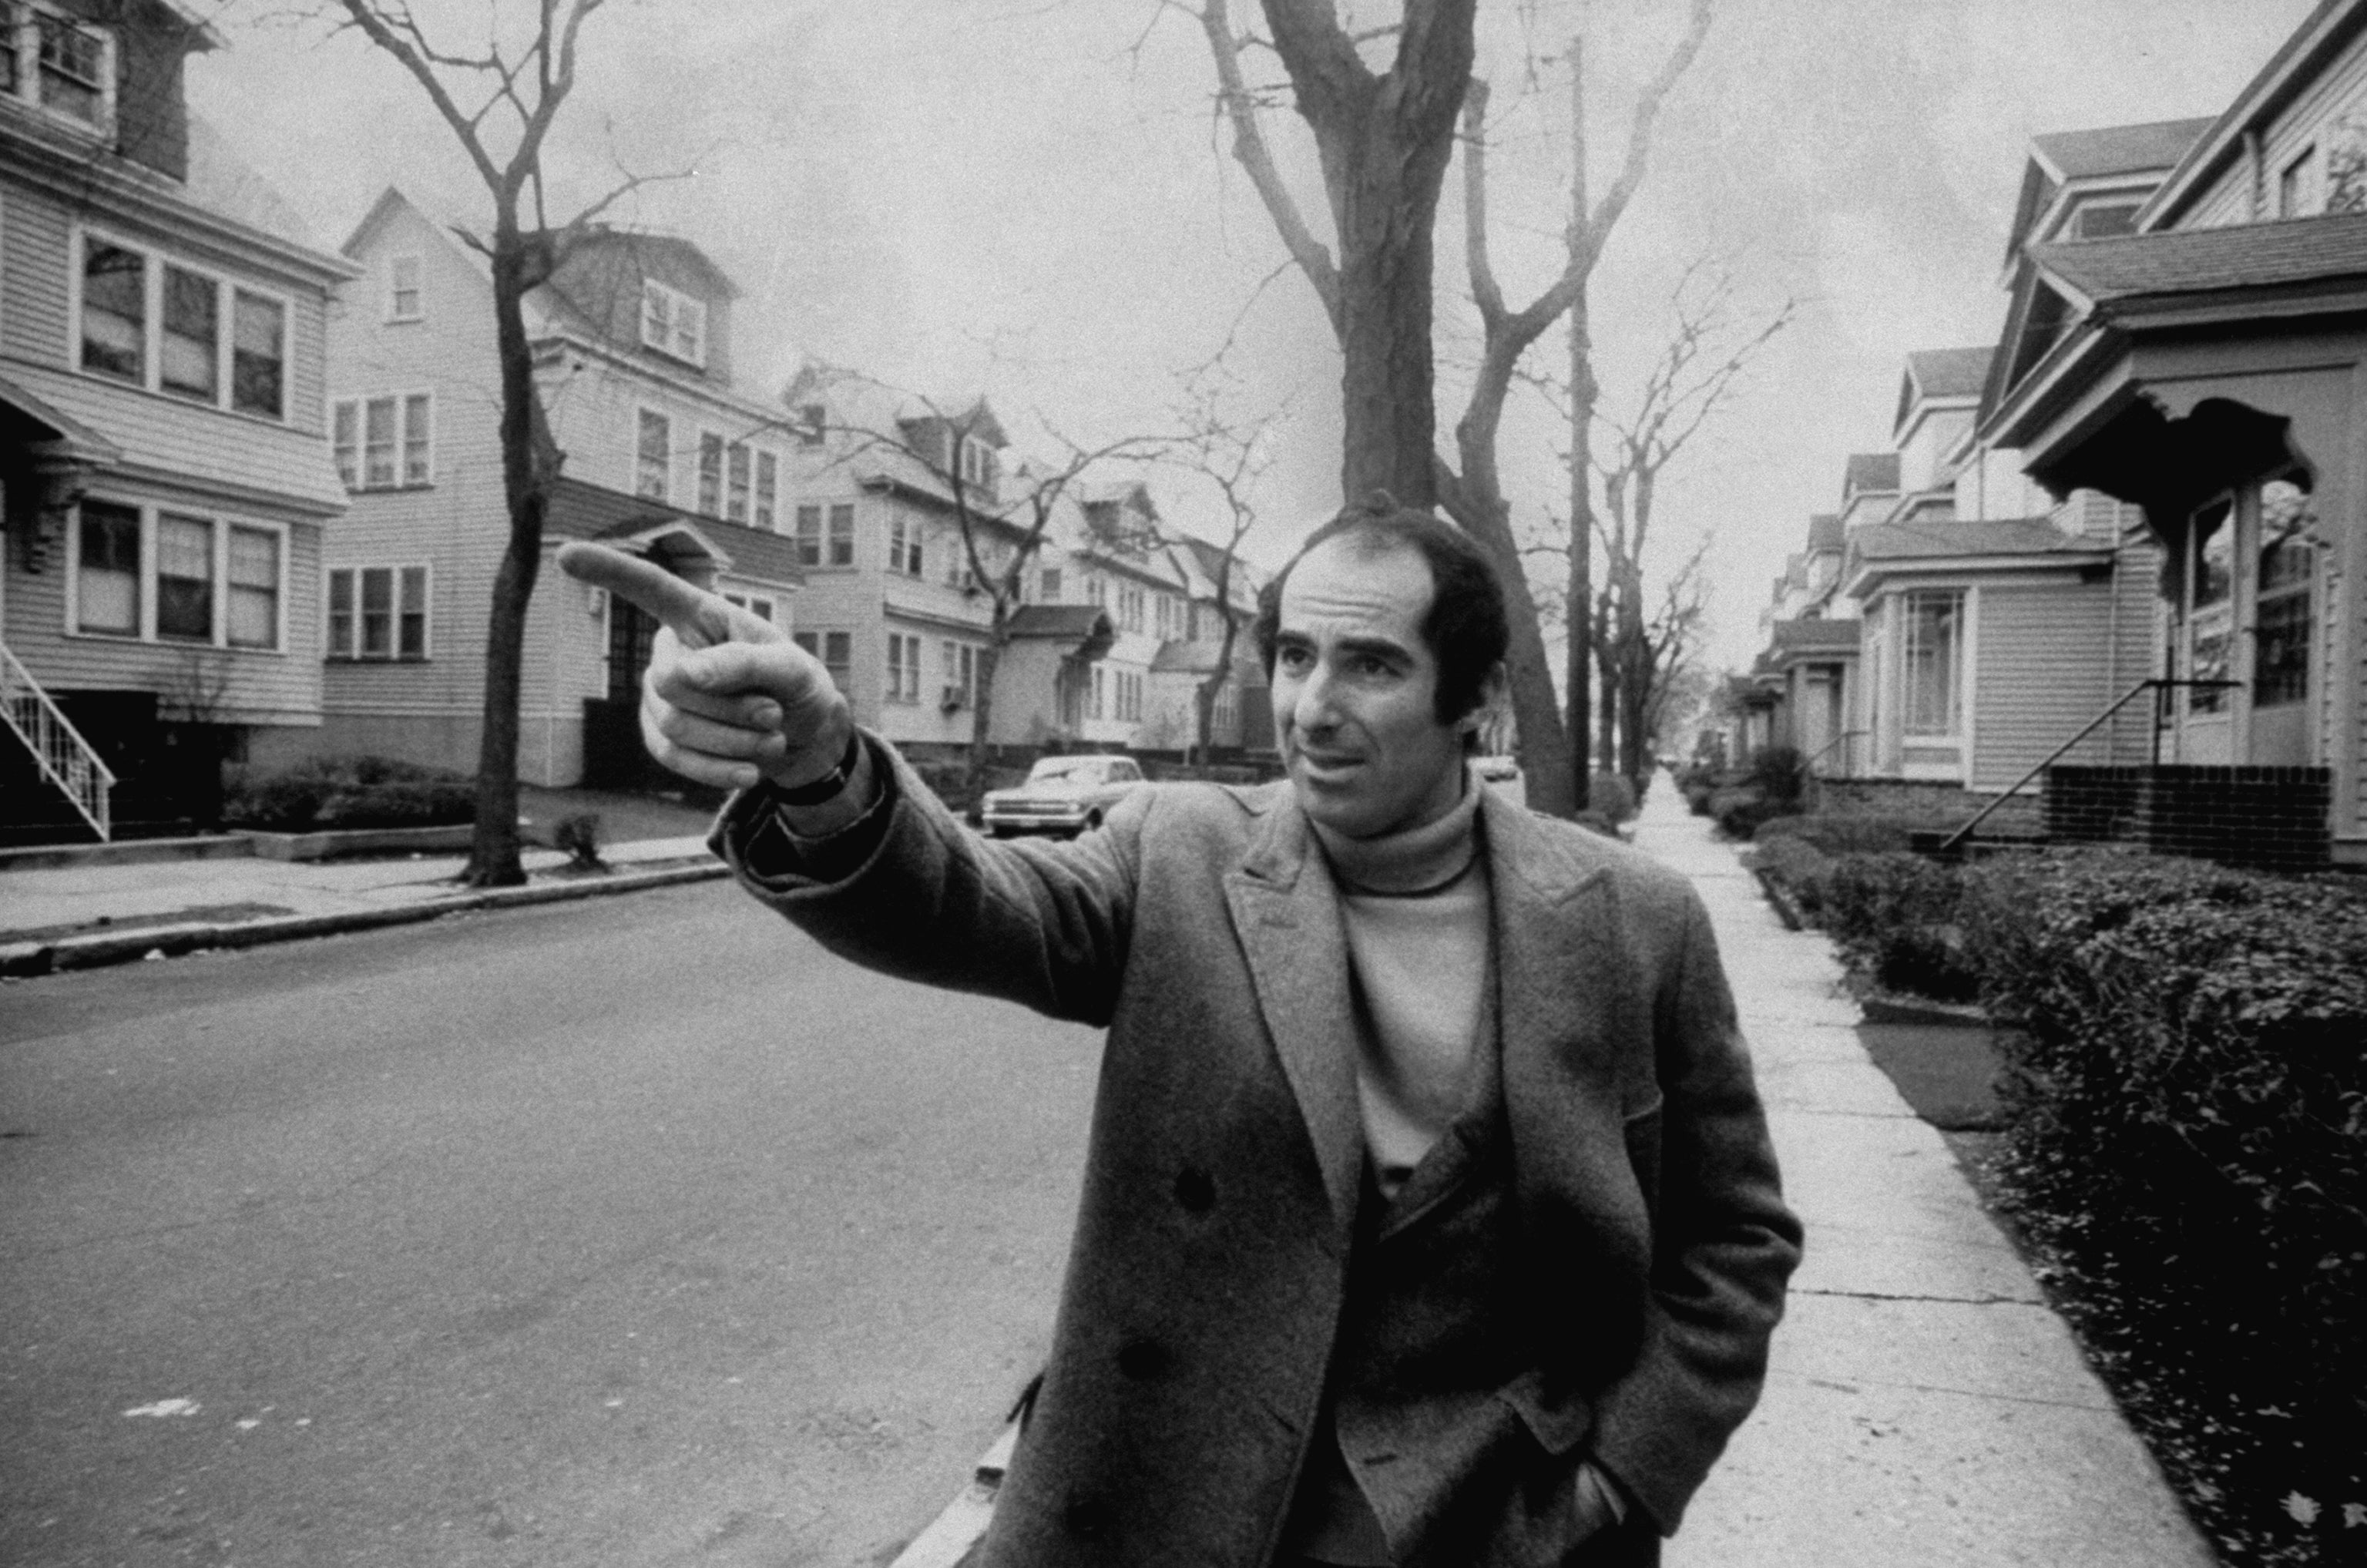 Philip Roth revisits the areas where he grew up, in Newark, New Jersey